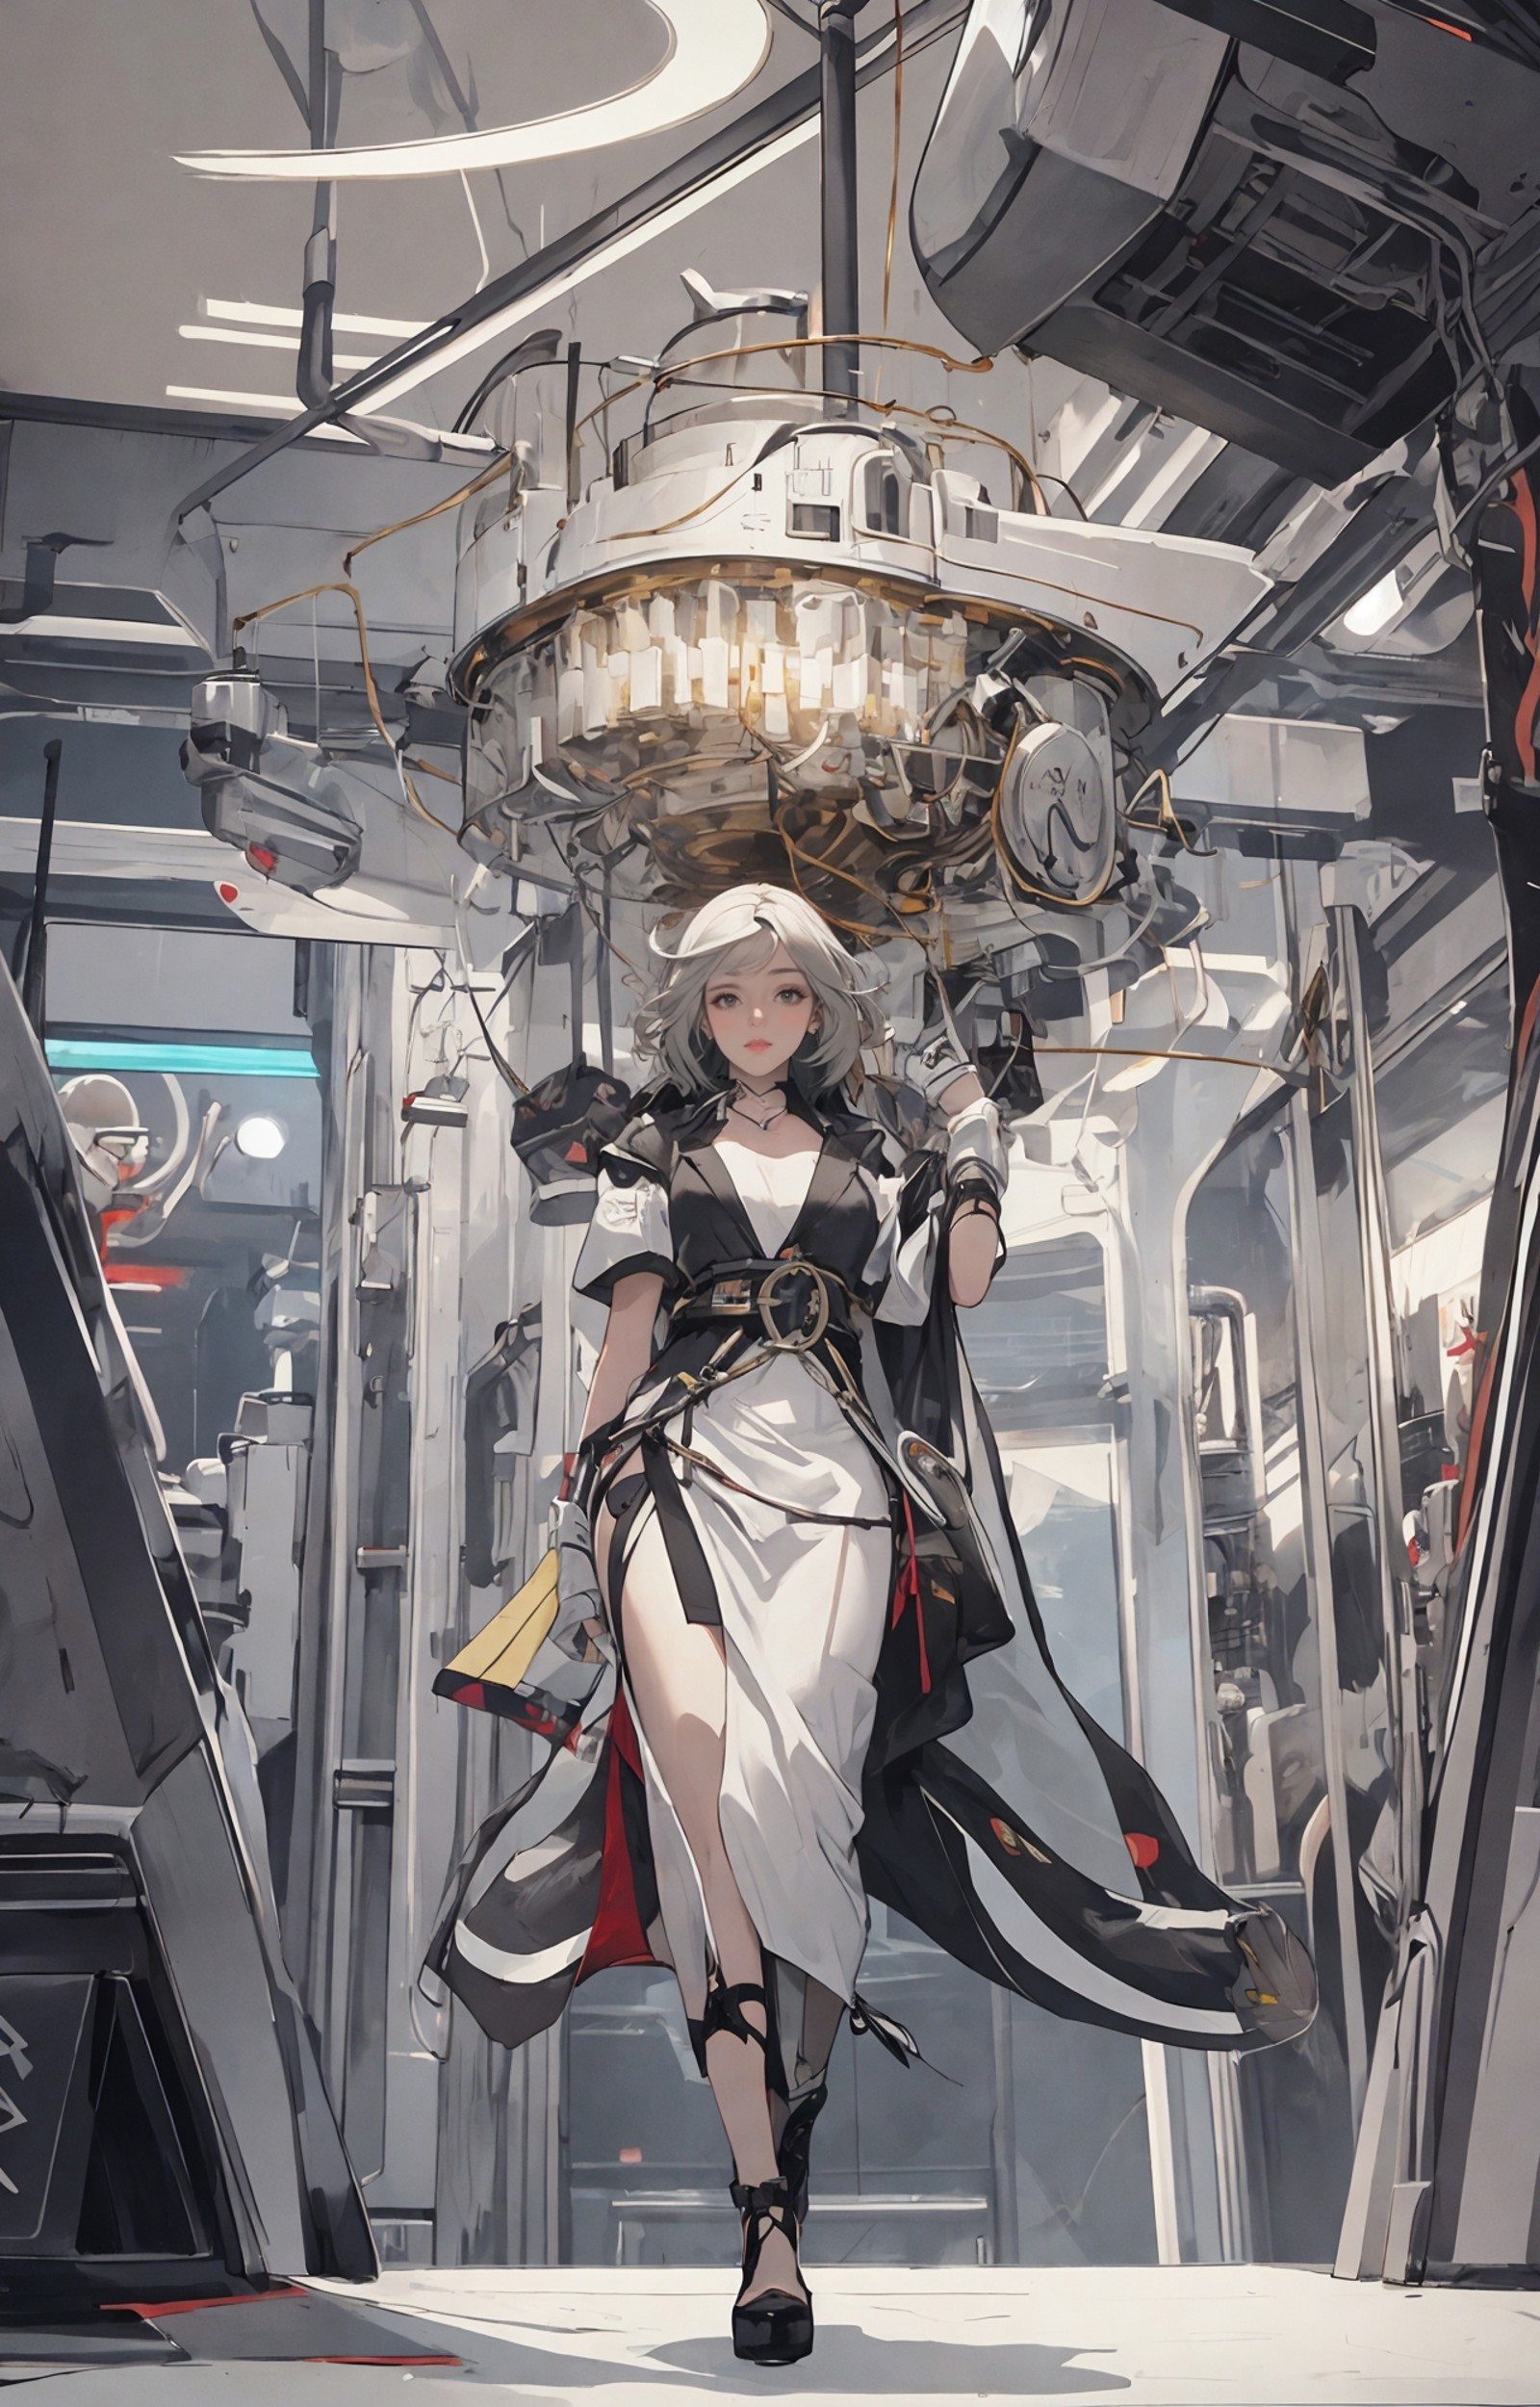 a woman in a white dress with gold accents and a futuristic background with lights and mirrors on the ceiling,cyberpunk ar...